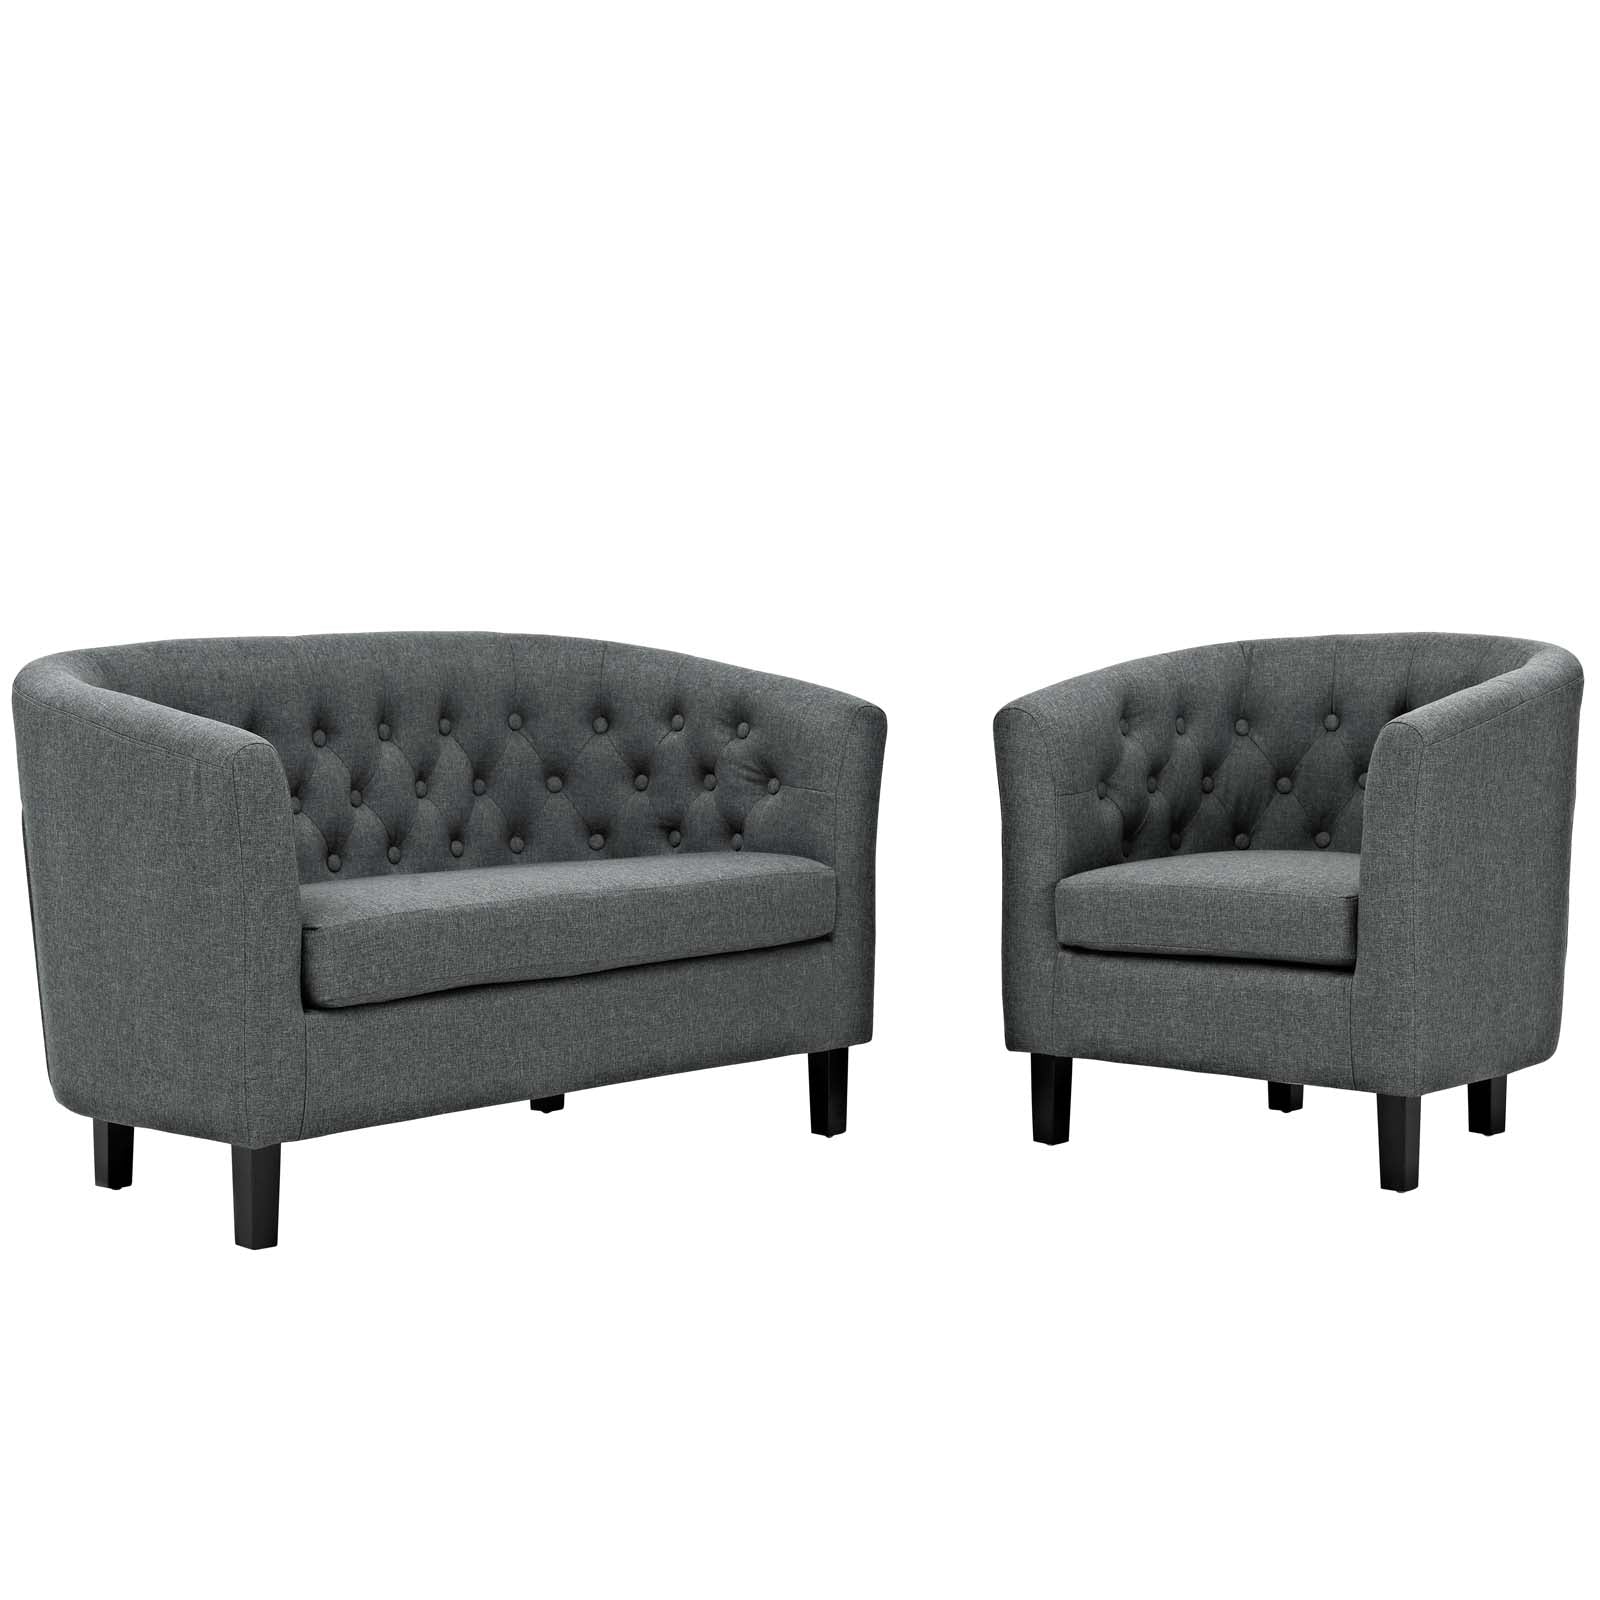 Modway Living Room Sets - Prospect 2 Piece Upholstered Fabric Loveseat and Armchair Set Gray